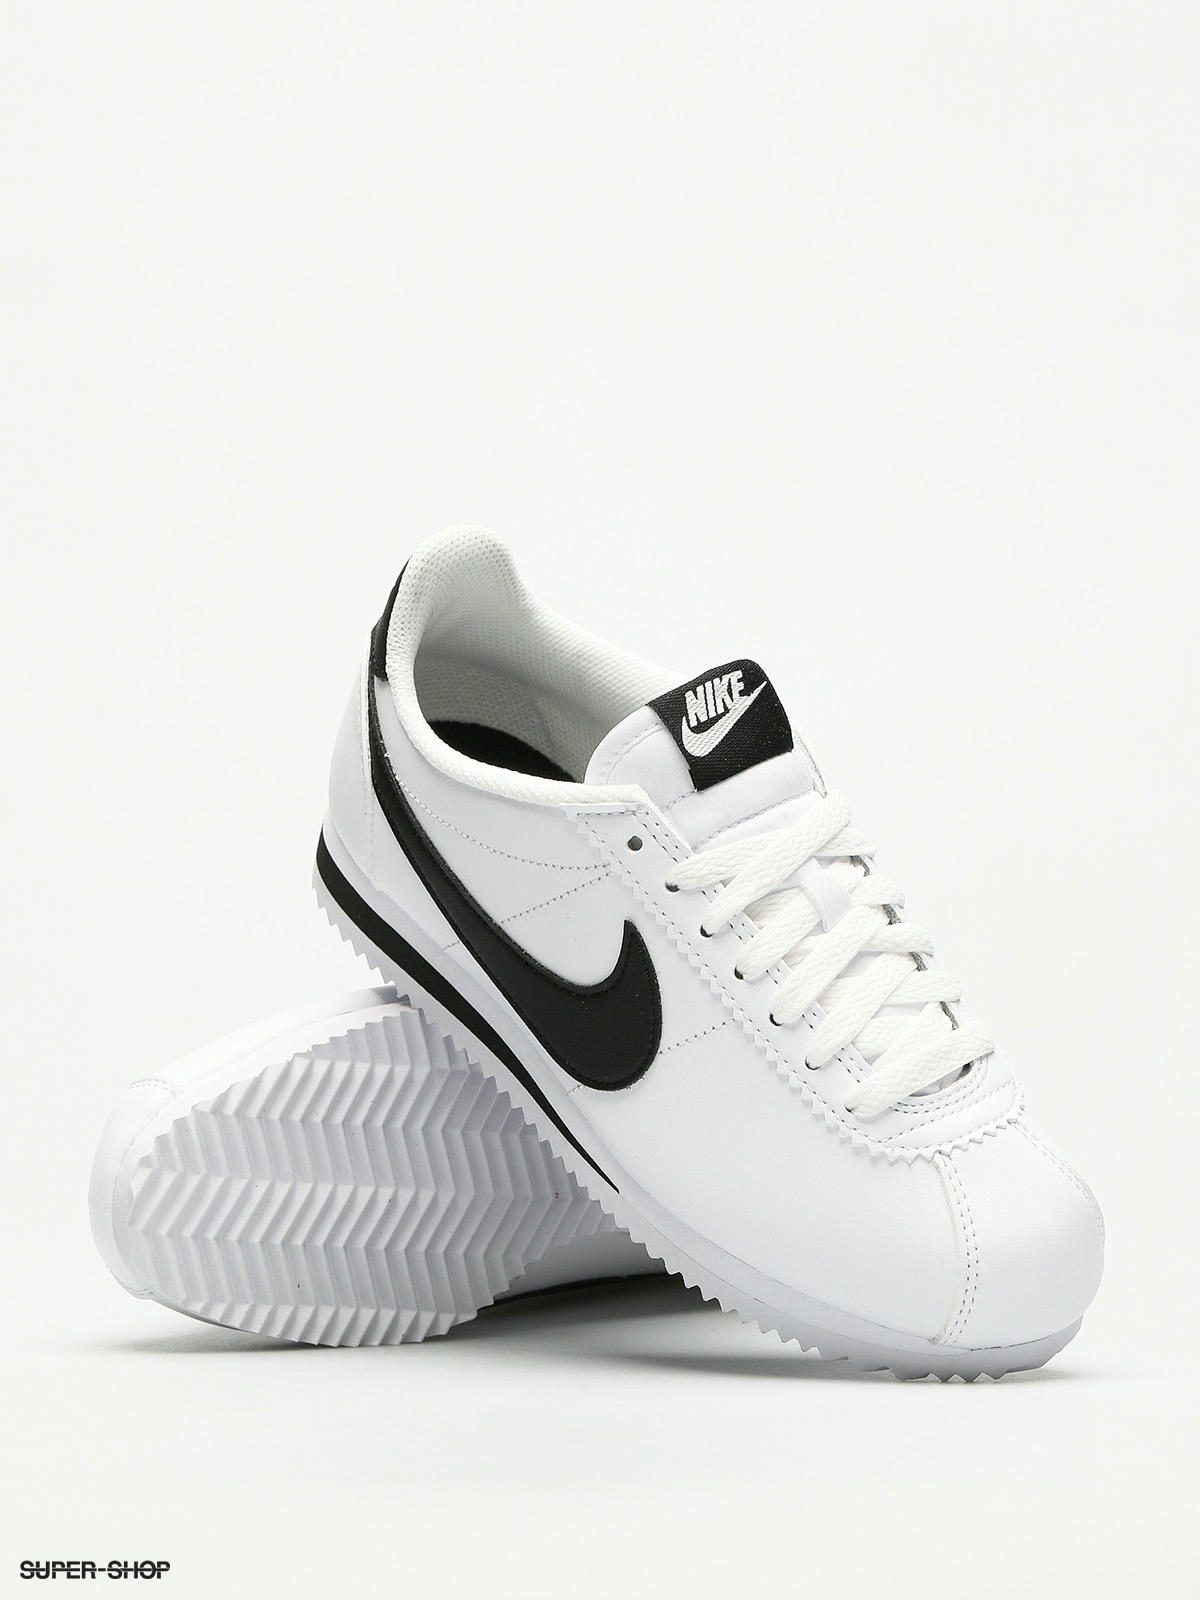 Nike Classic Cortez Leather Shoes Wmn 